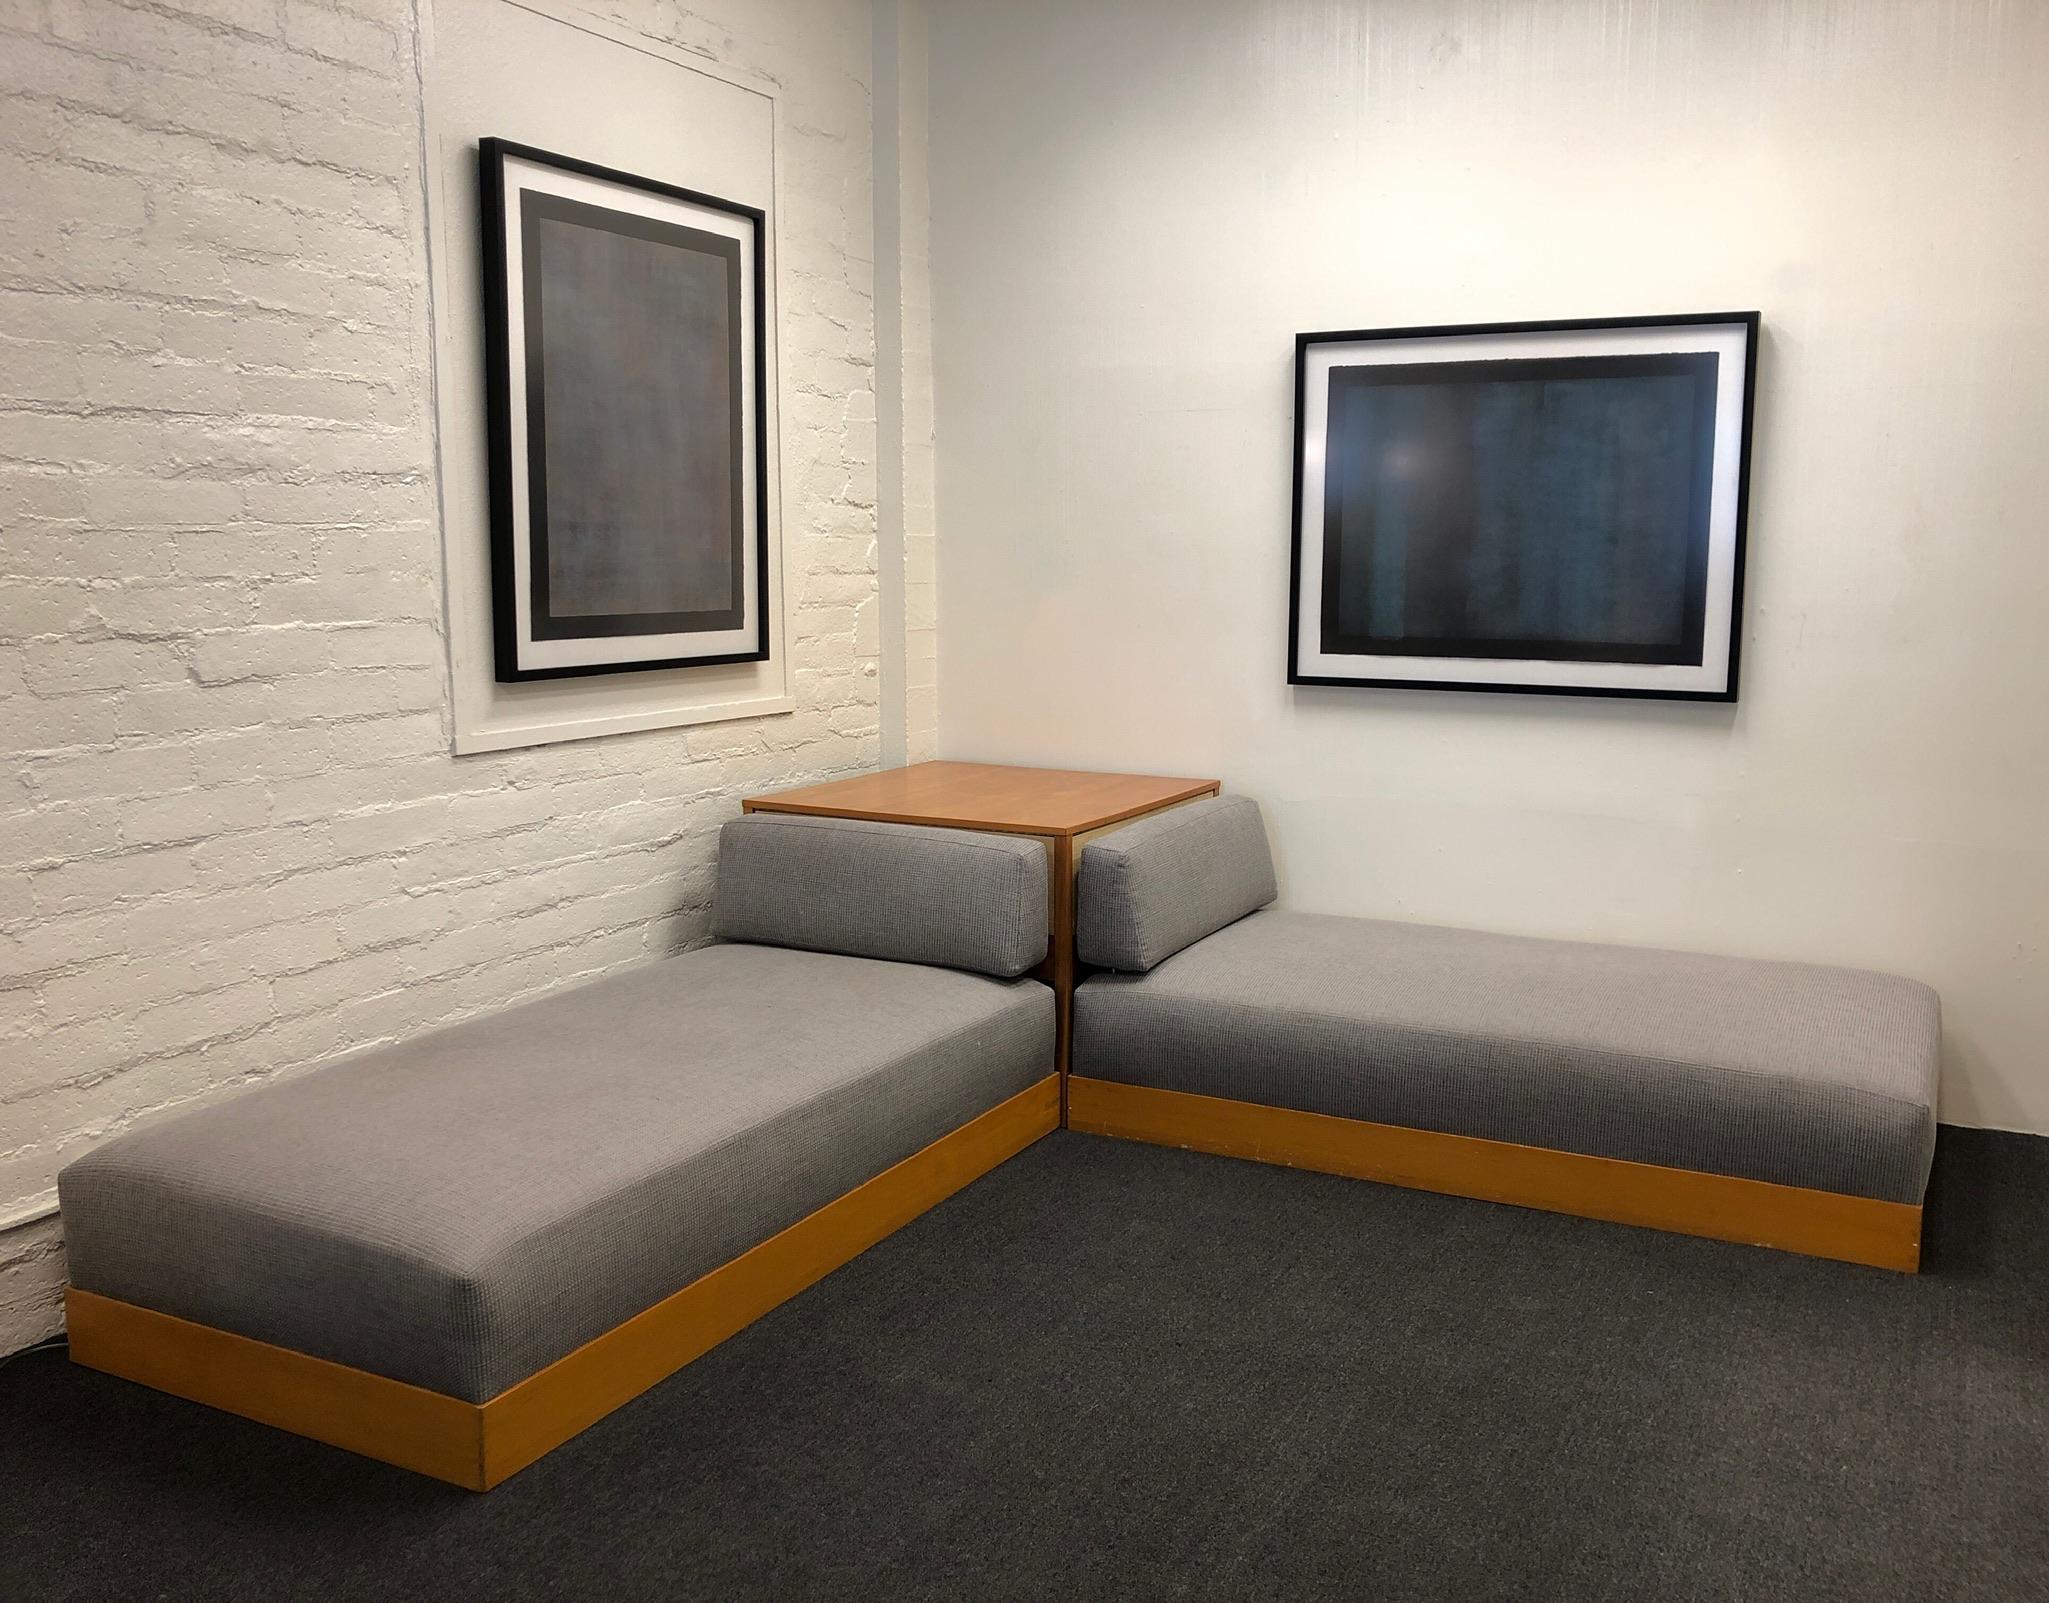 Rare set of daybeds with corner table by Herman Miller.
The wood is in original condition, so it shows some wear consistent with age.
It was re-covered  at one point. The fabric is light gray.
The beds retain original Herman Miller tag.